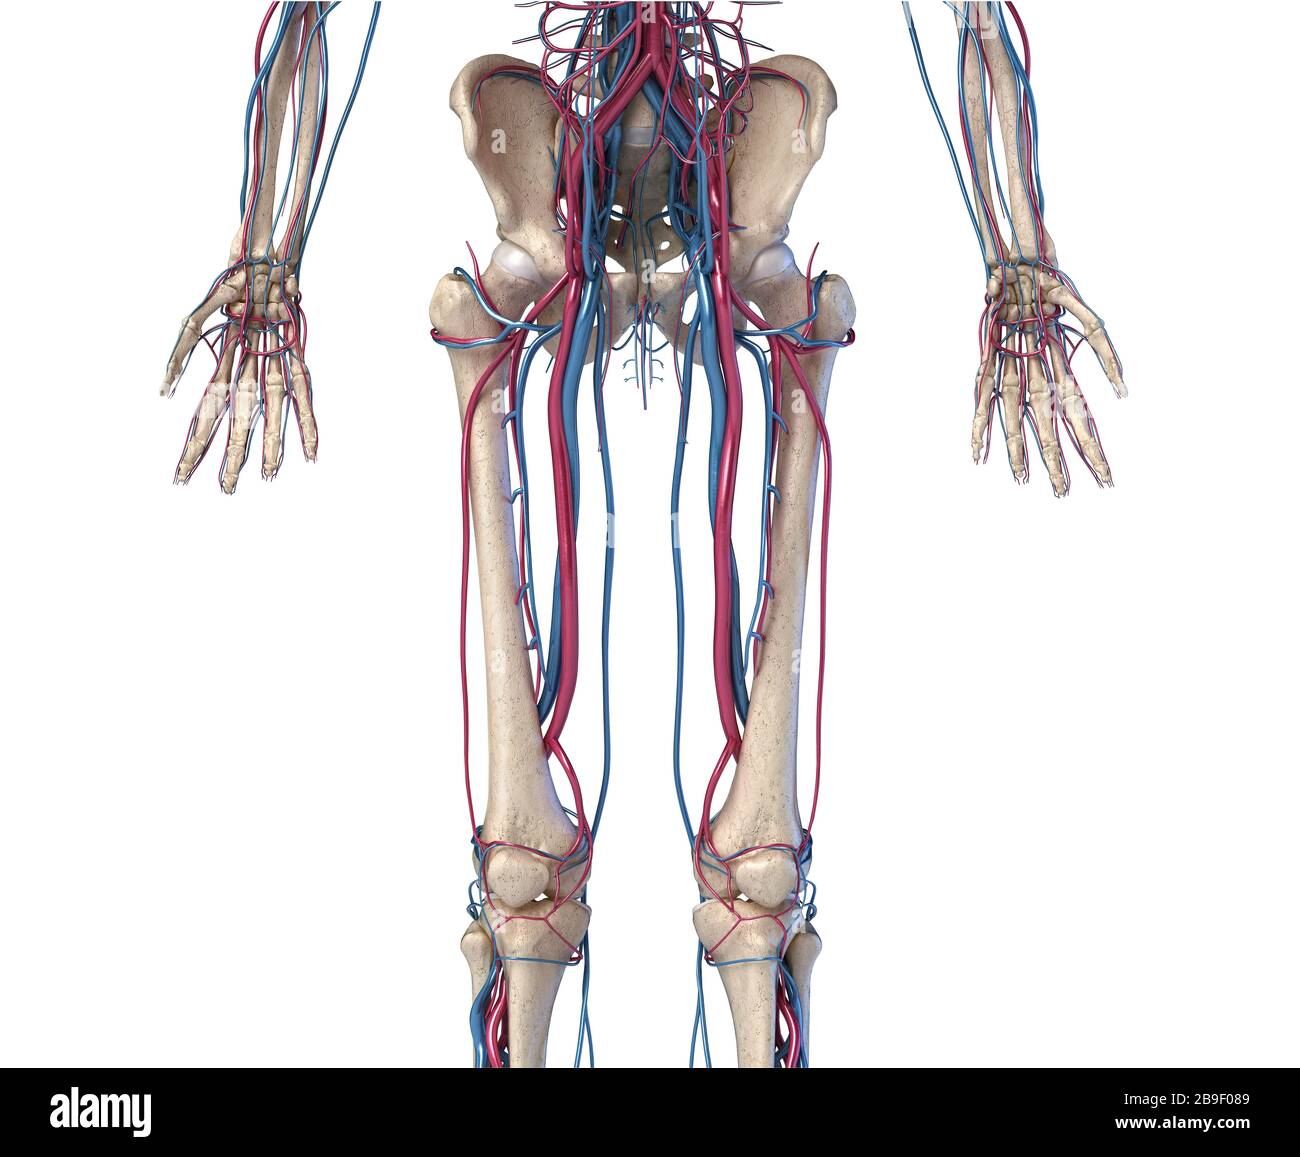 Front view of hip, limbs and hands of skeletal system with veins and arteries, white background. Stock Photo